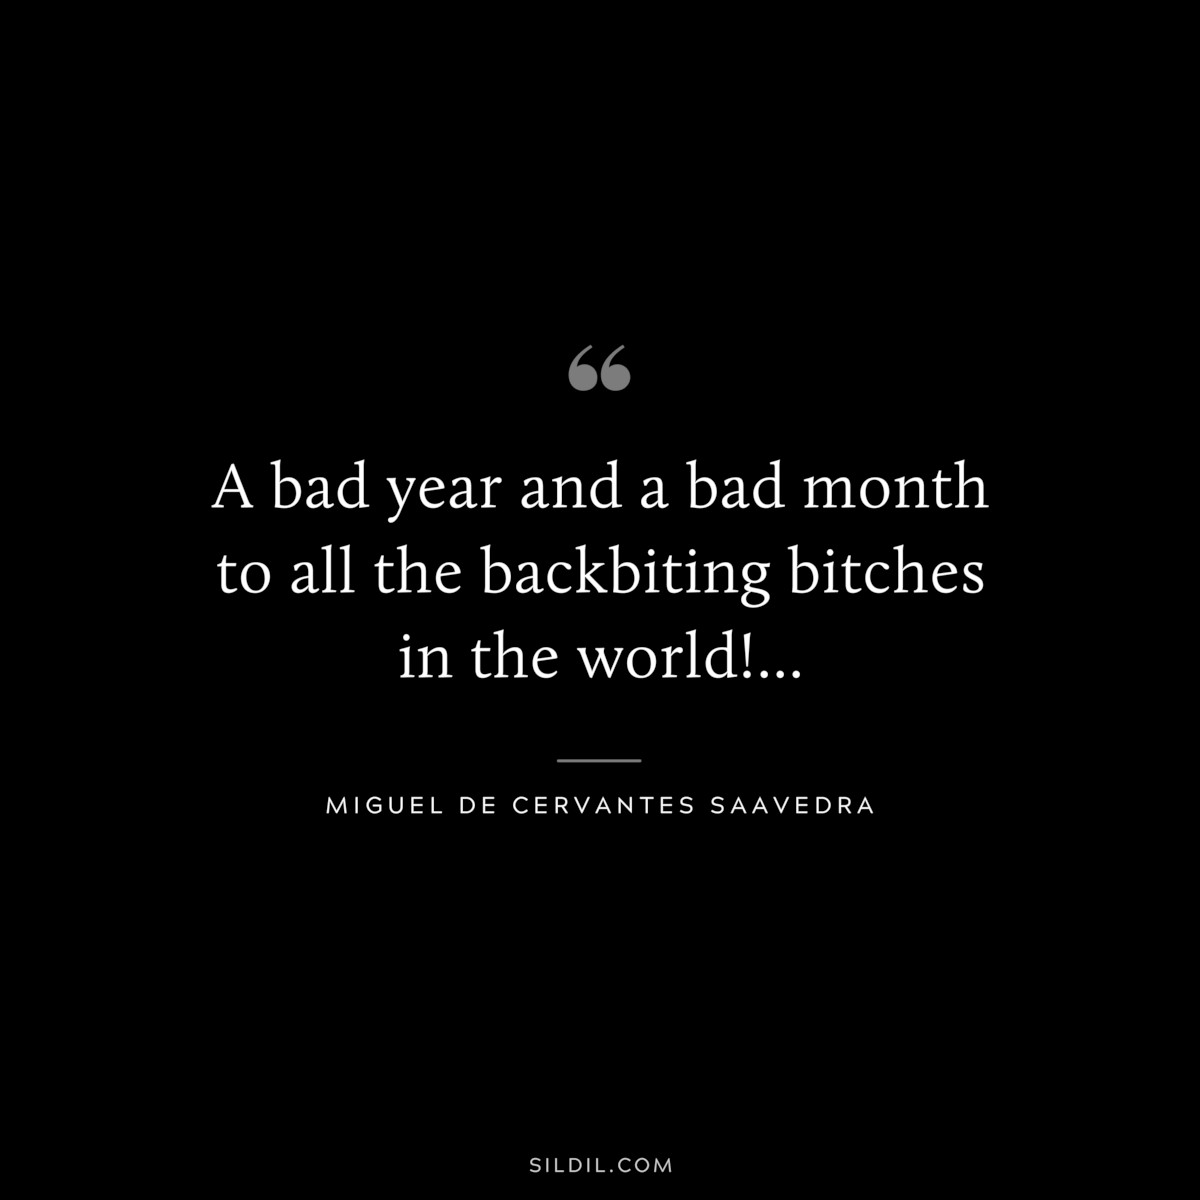 A bad year and a bad month to all the backbiting bitches in the world!... ― Miguel de Cervantes Saavedra